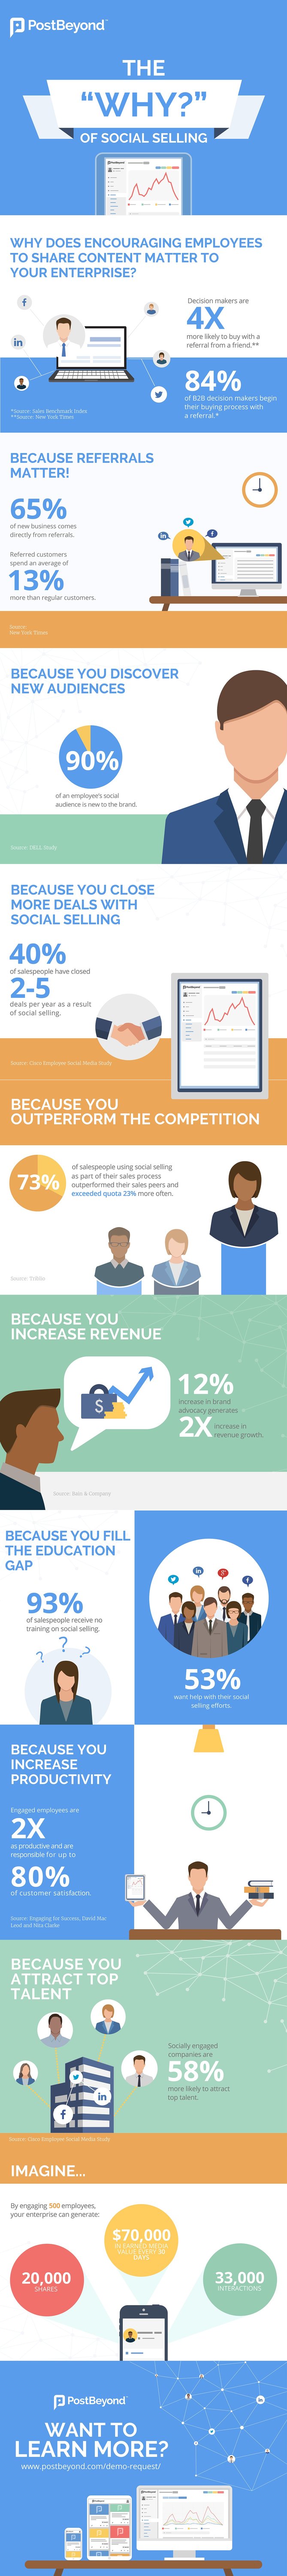 Why-Your-Sales-Team-Should-Use-Social-Selling-PostBeyond.jpg